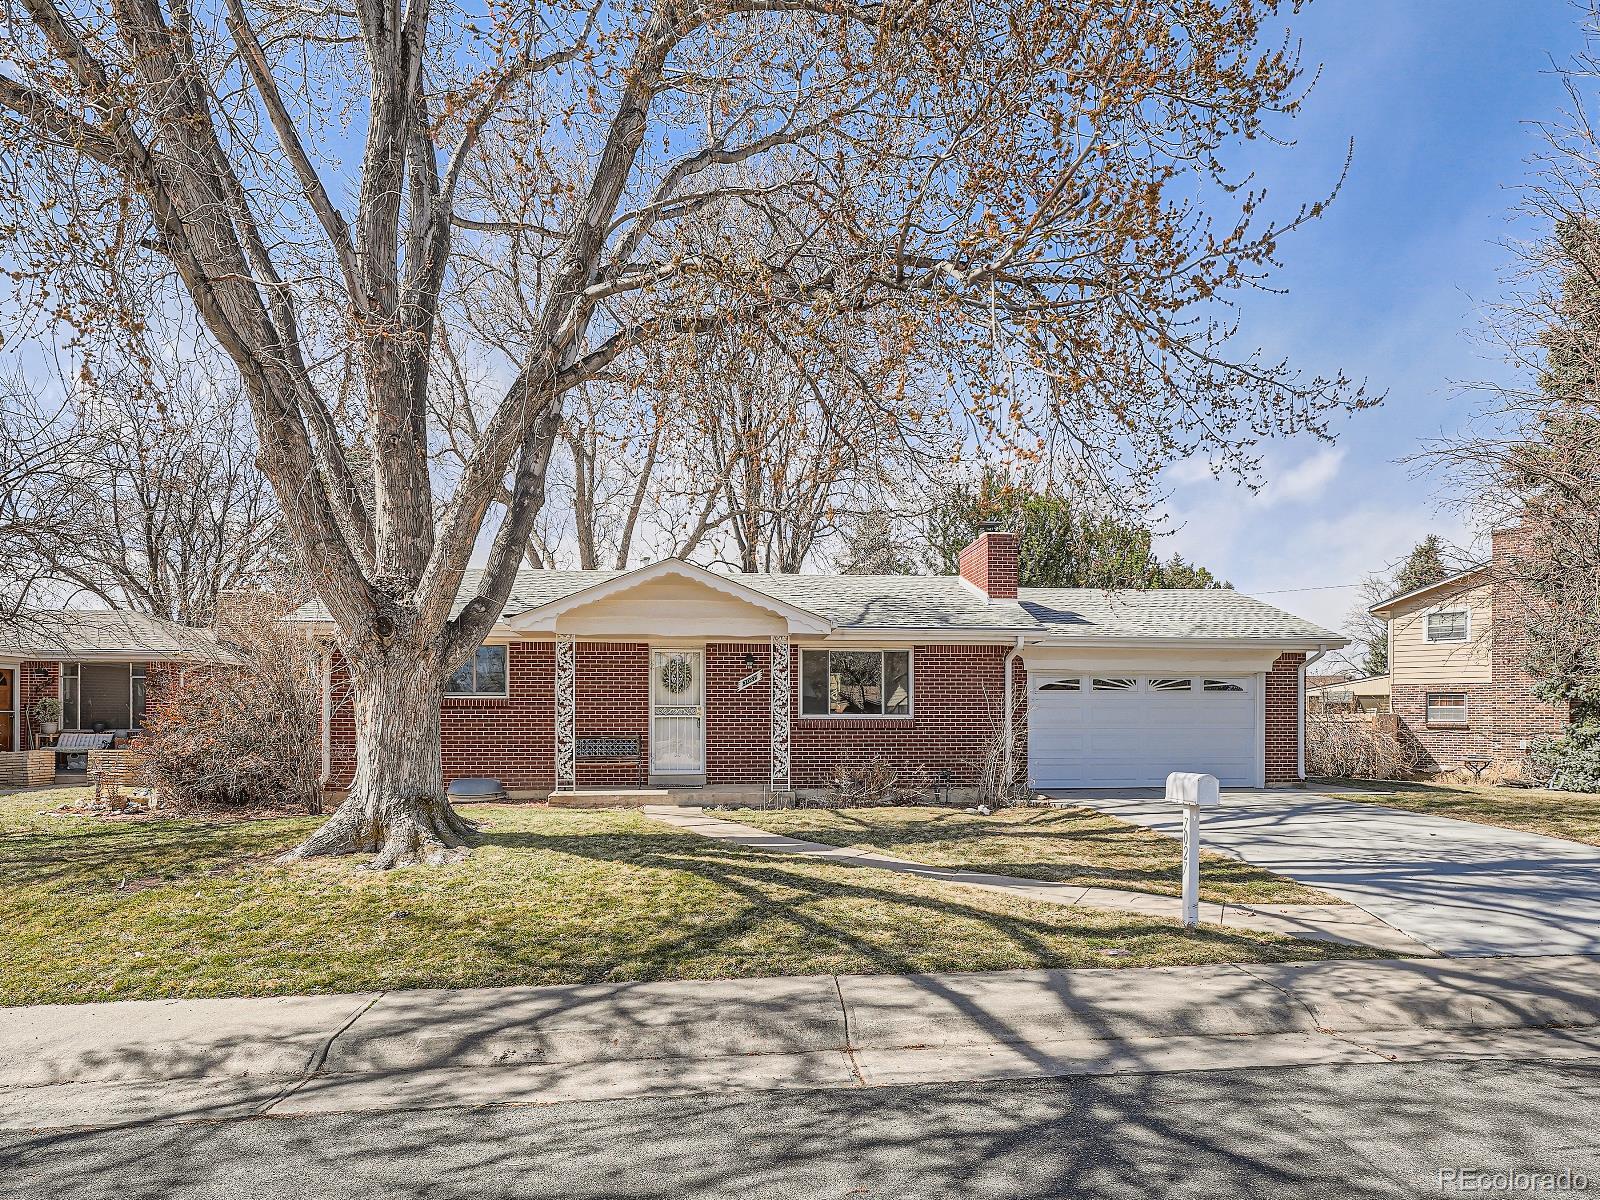 7027  carr court, Arvada sold home. Closed on 2024-05-02 for $635,000.